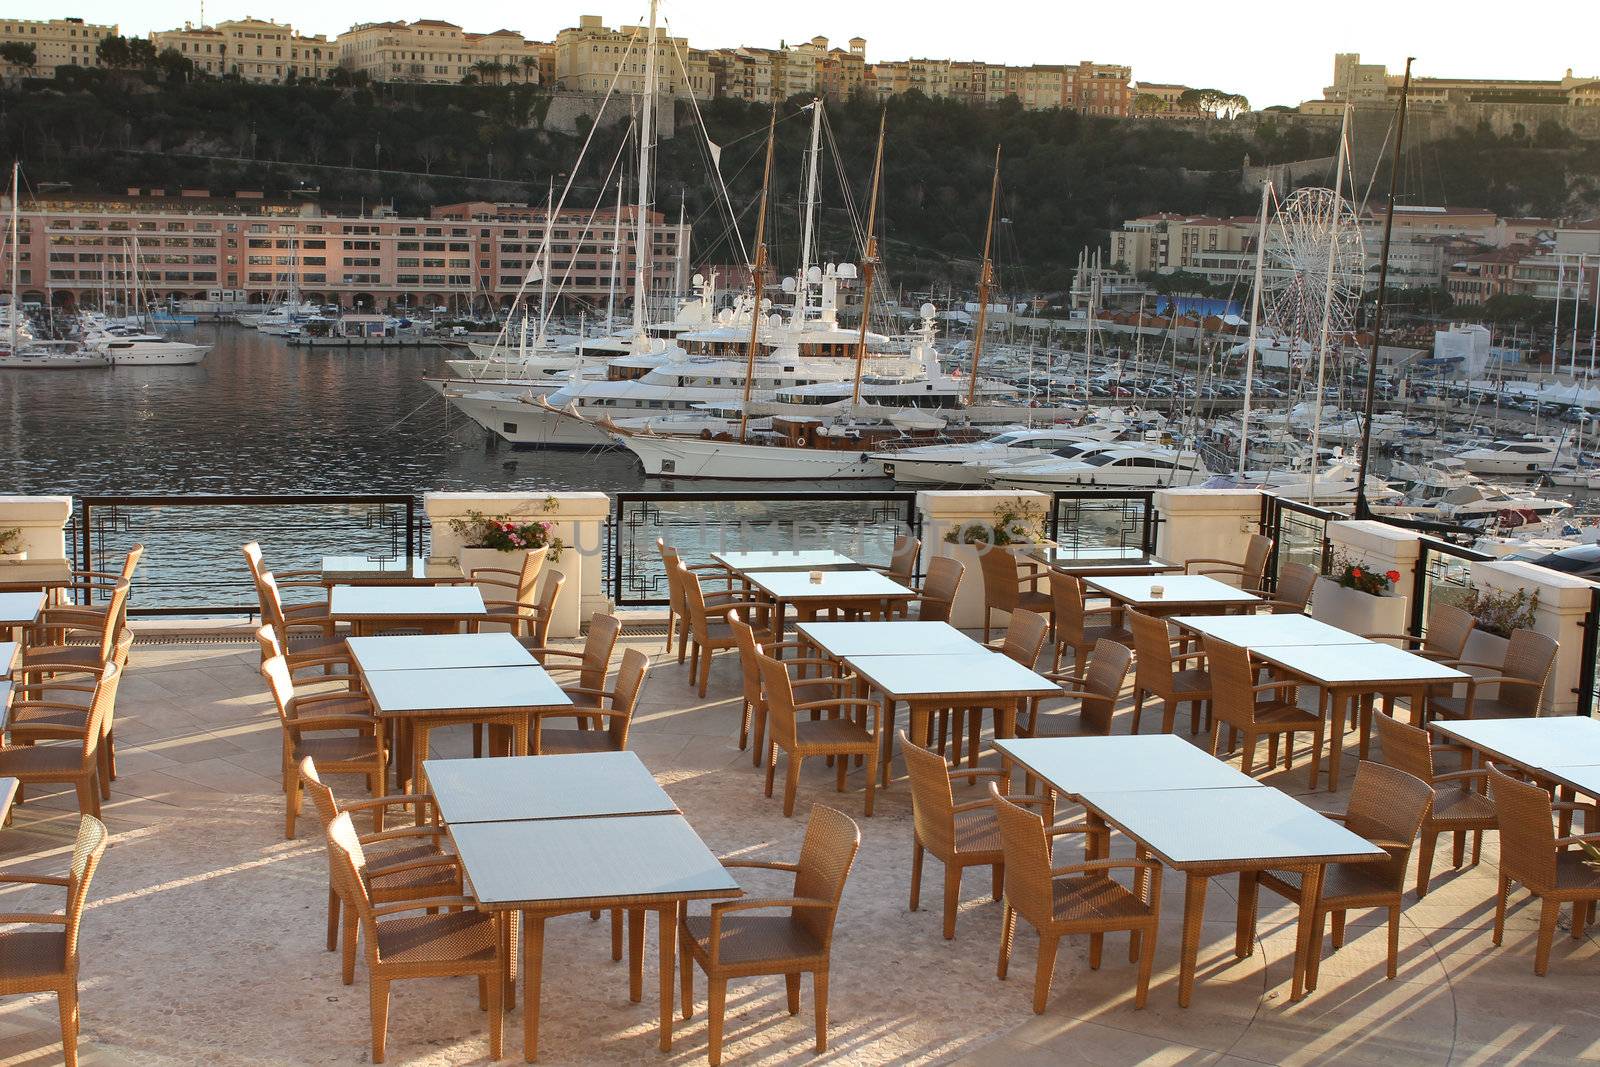 Restaurant at the harbor of monaco with yachts in the background